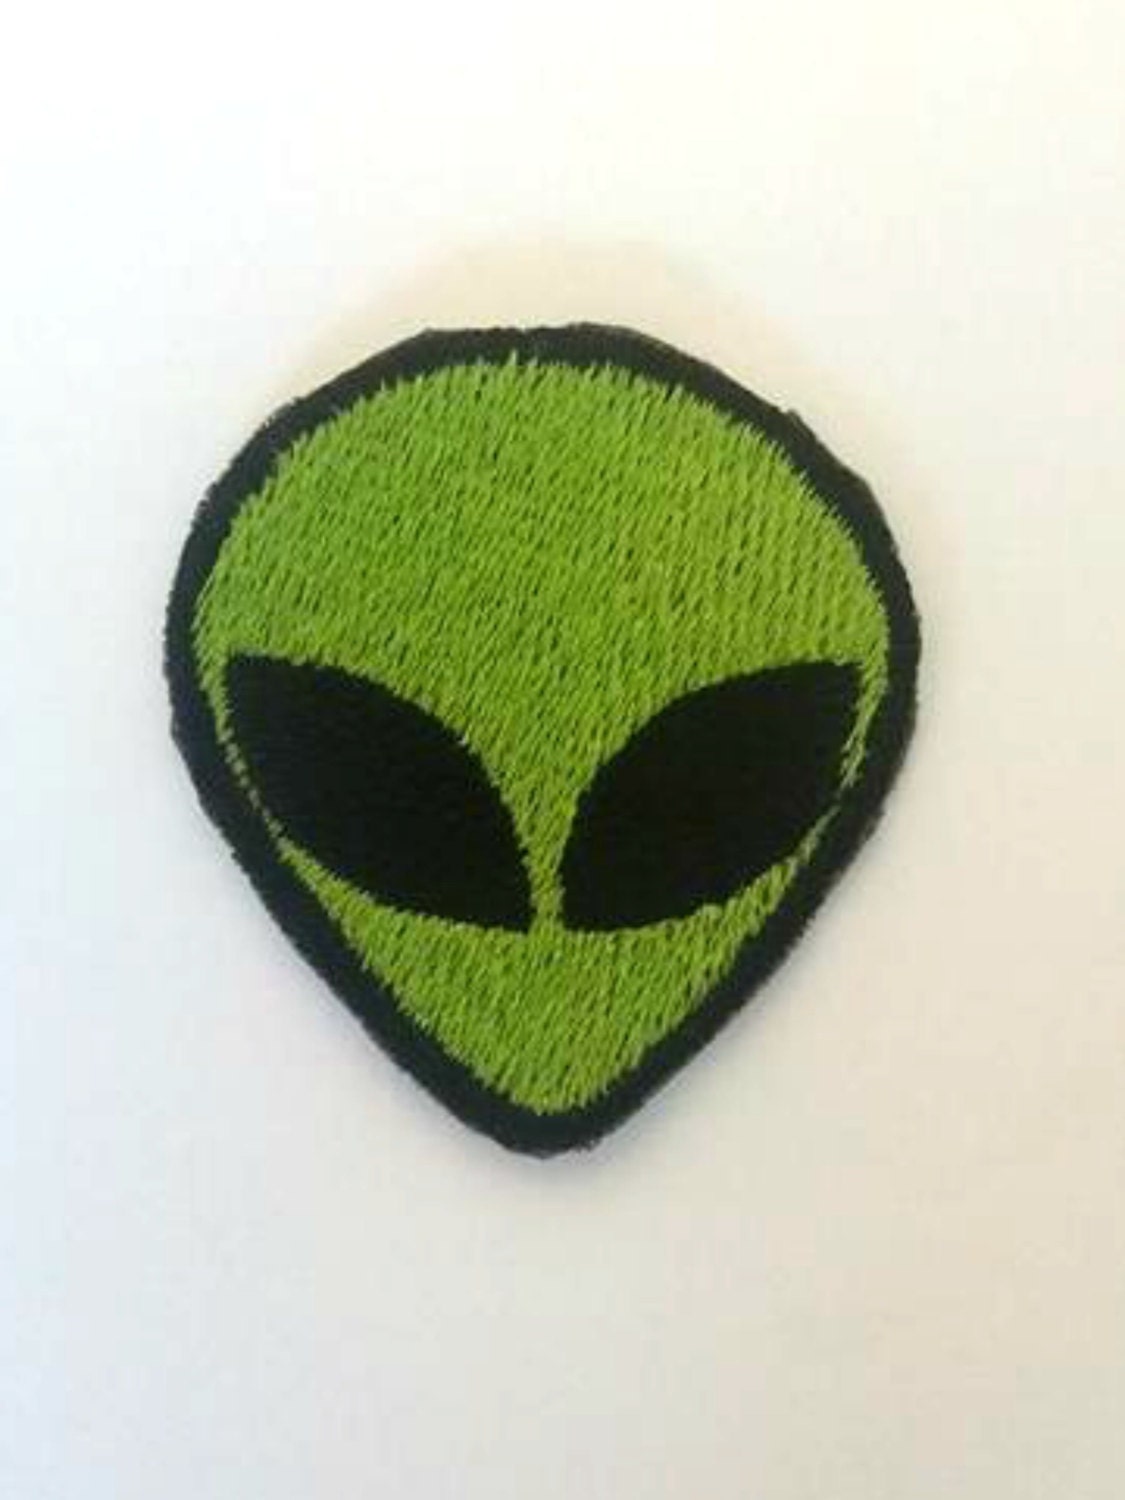 Retro Alien Patch Embroidered Badge Sew on Alien Green